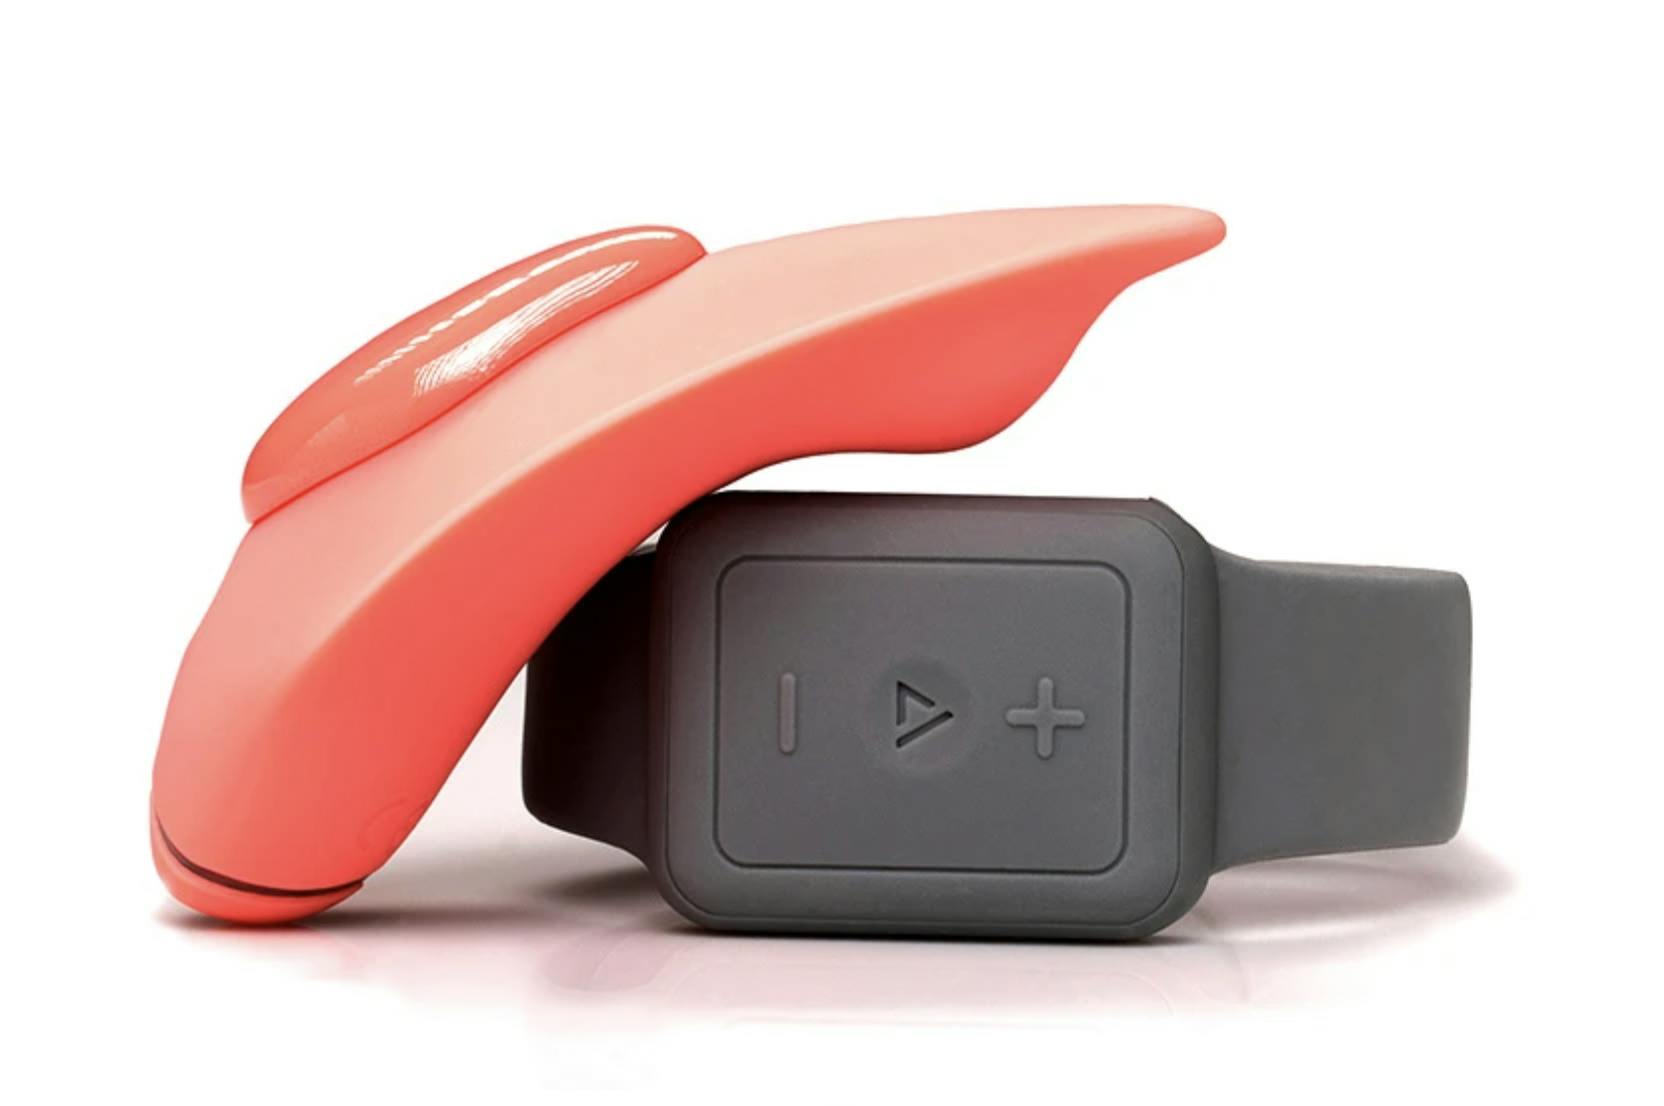 Clandestine Devices' Companion wearable remote vibrator with the watch shaped remote